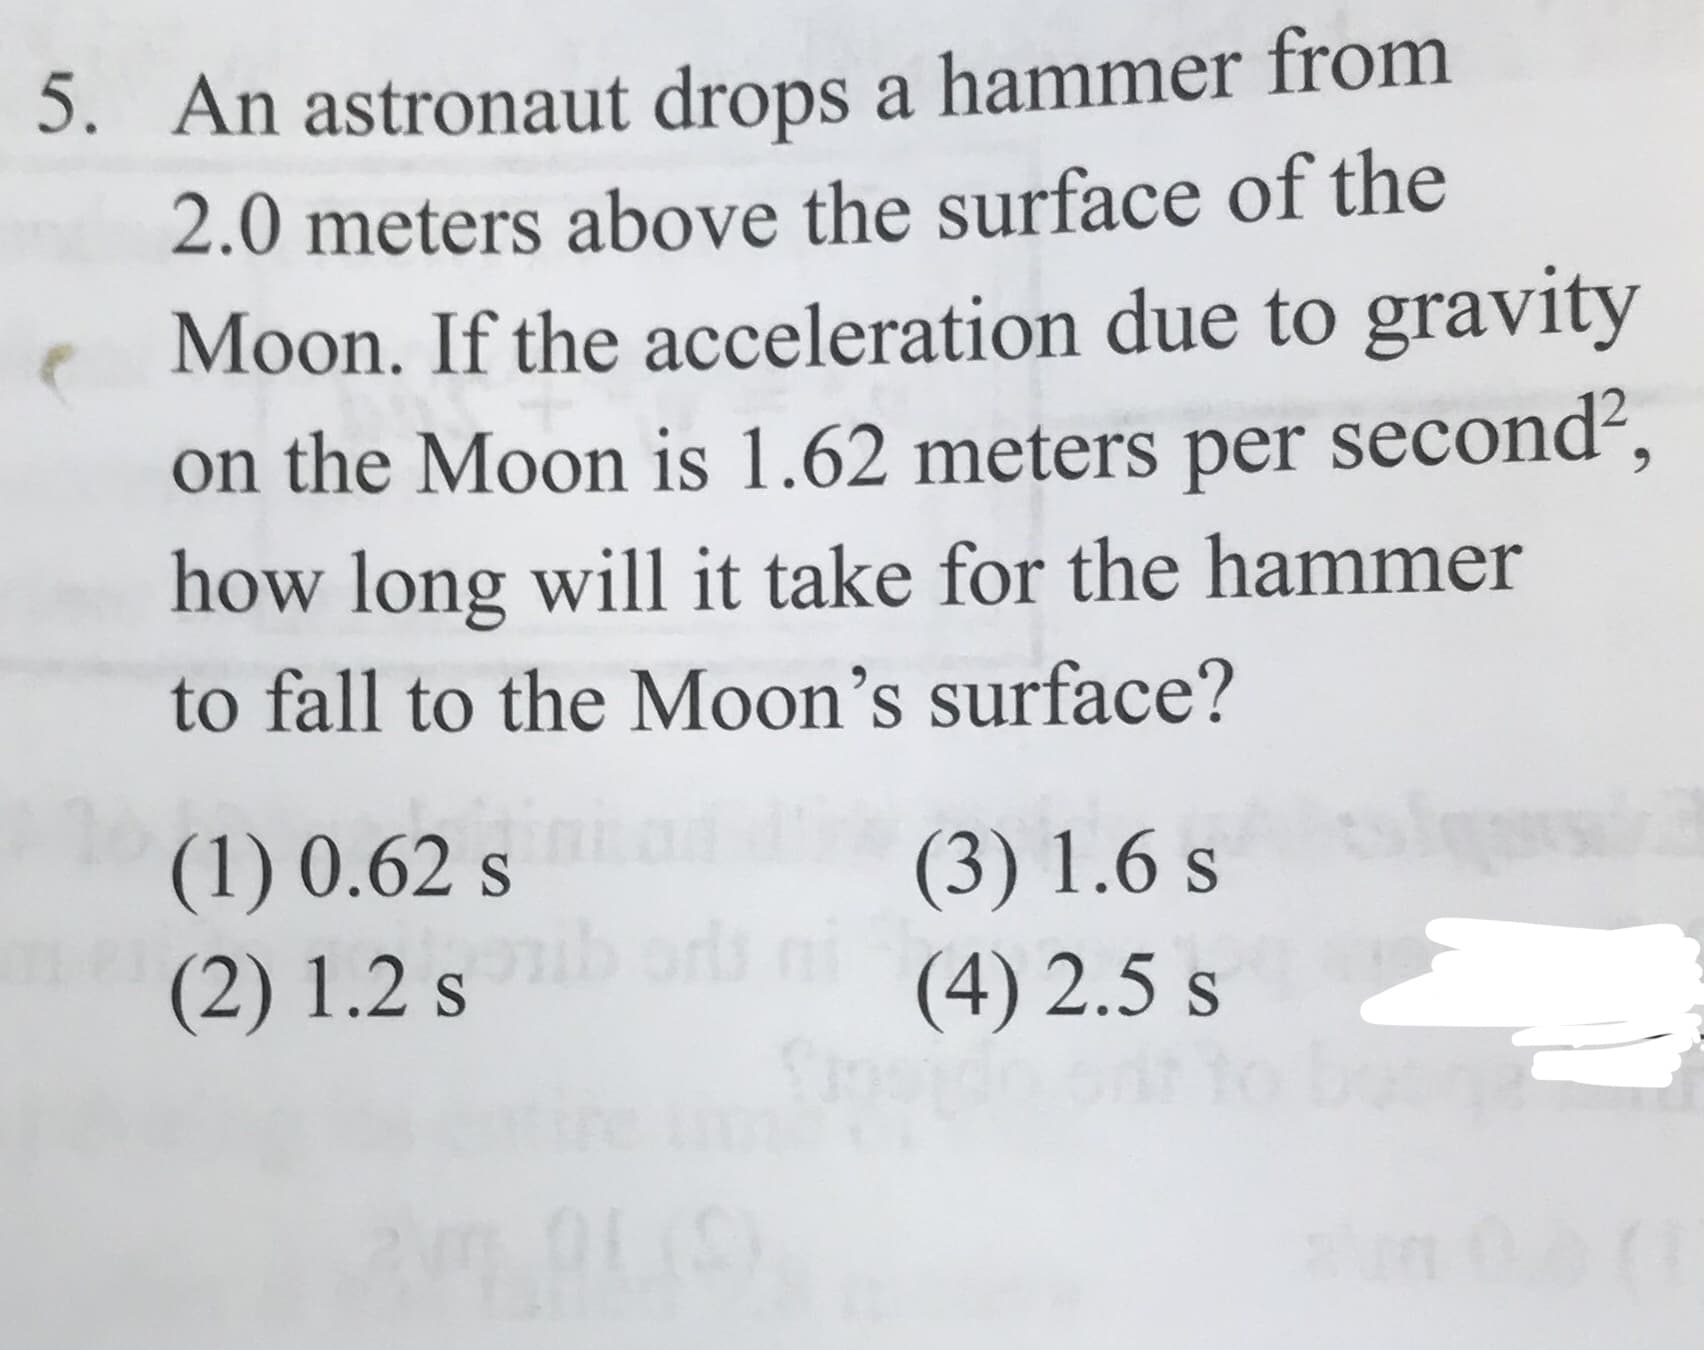 5. An astronaut drops a hammer from
2.0 meters above the surface of the
Moon. If the acceleration due to gravity
on the Moon is 1.62 meters per second,
how long will it take for the hammer
to fall to the Moon's surface?
(1) 0.62 s
(2) 1.2 s
(3) 1.6 s
(4) 2.5 s
S
(1
